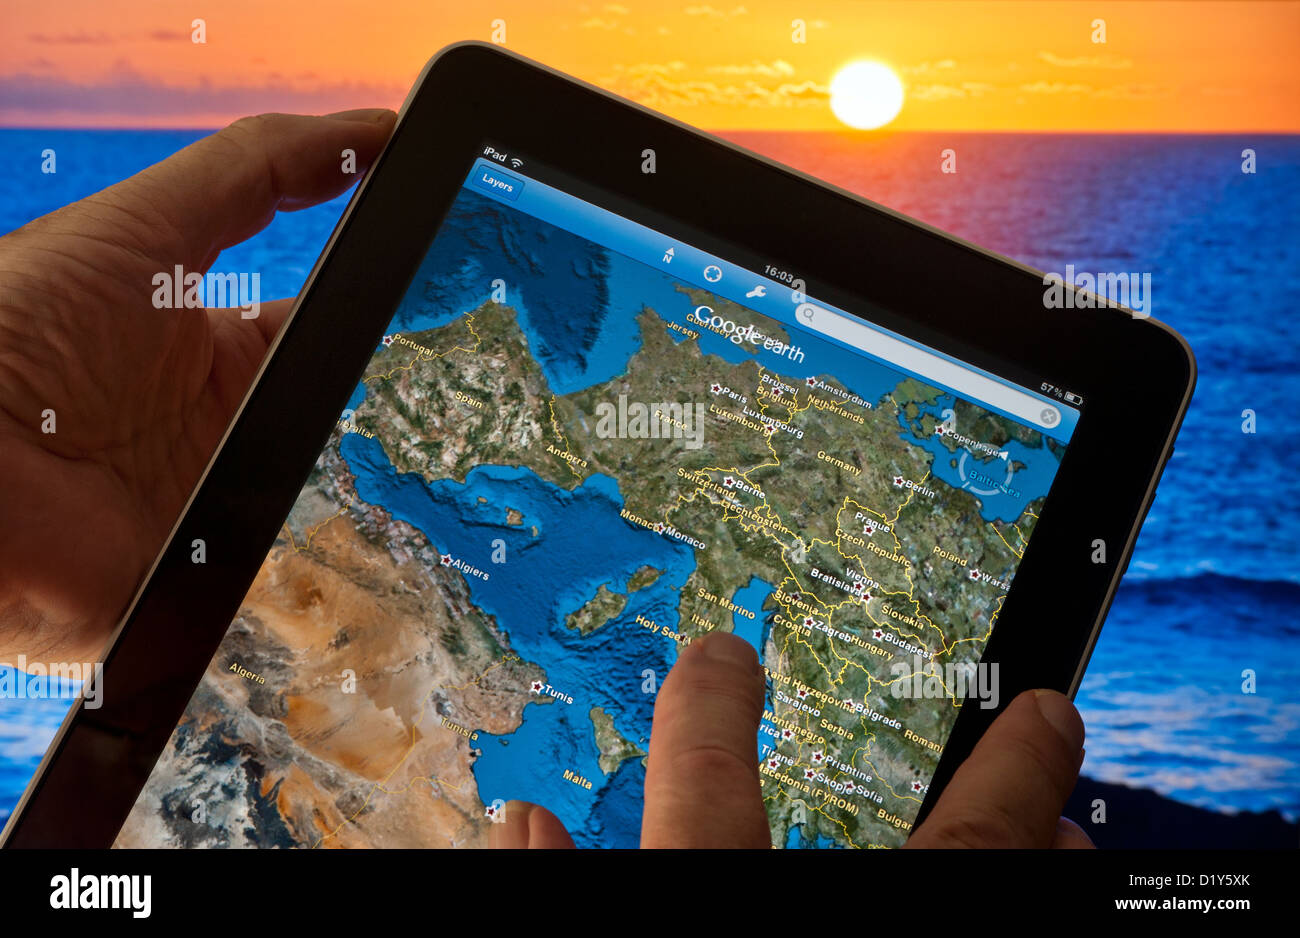 Apple iPad smart tablet with Google Earth application on screen featuring continental Eastern Europe, France Africa etc, sea and sunset in background Stock Photo